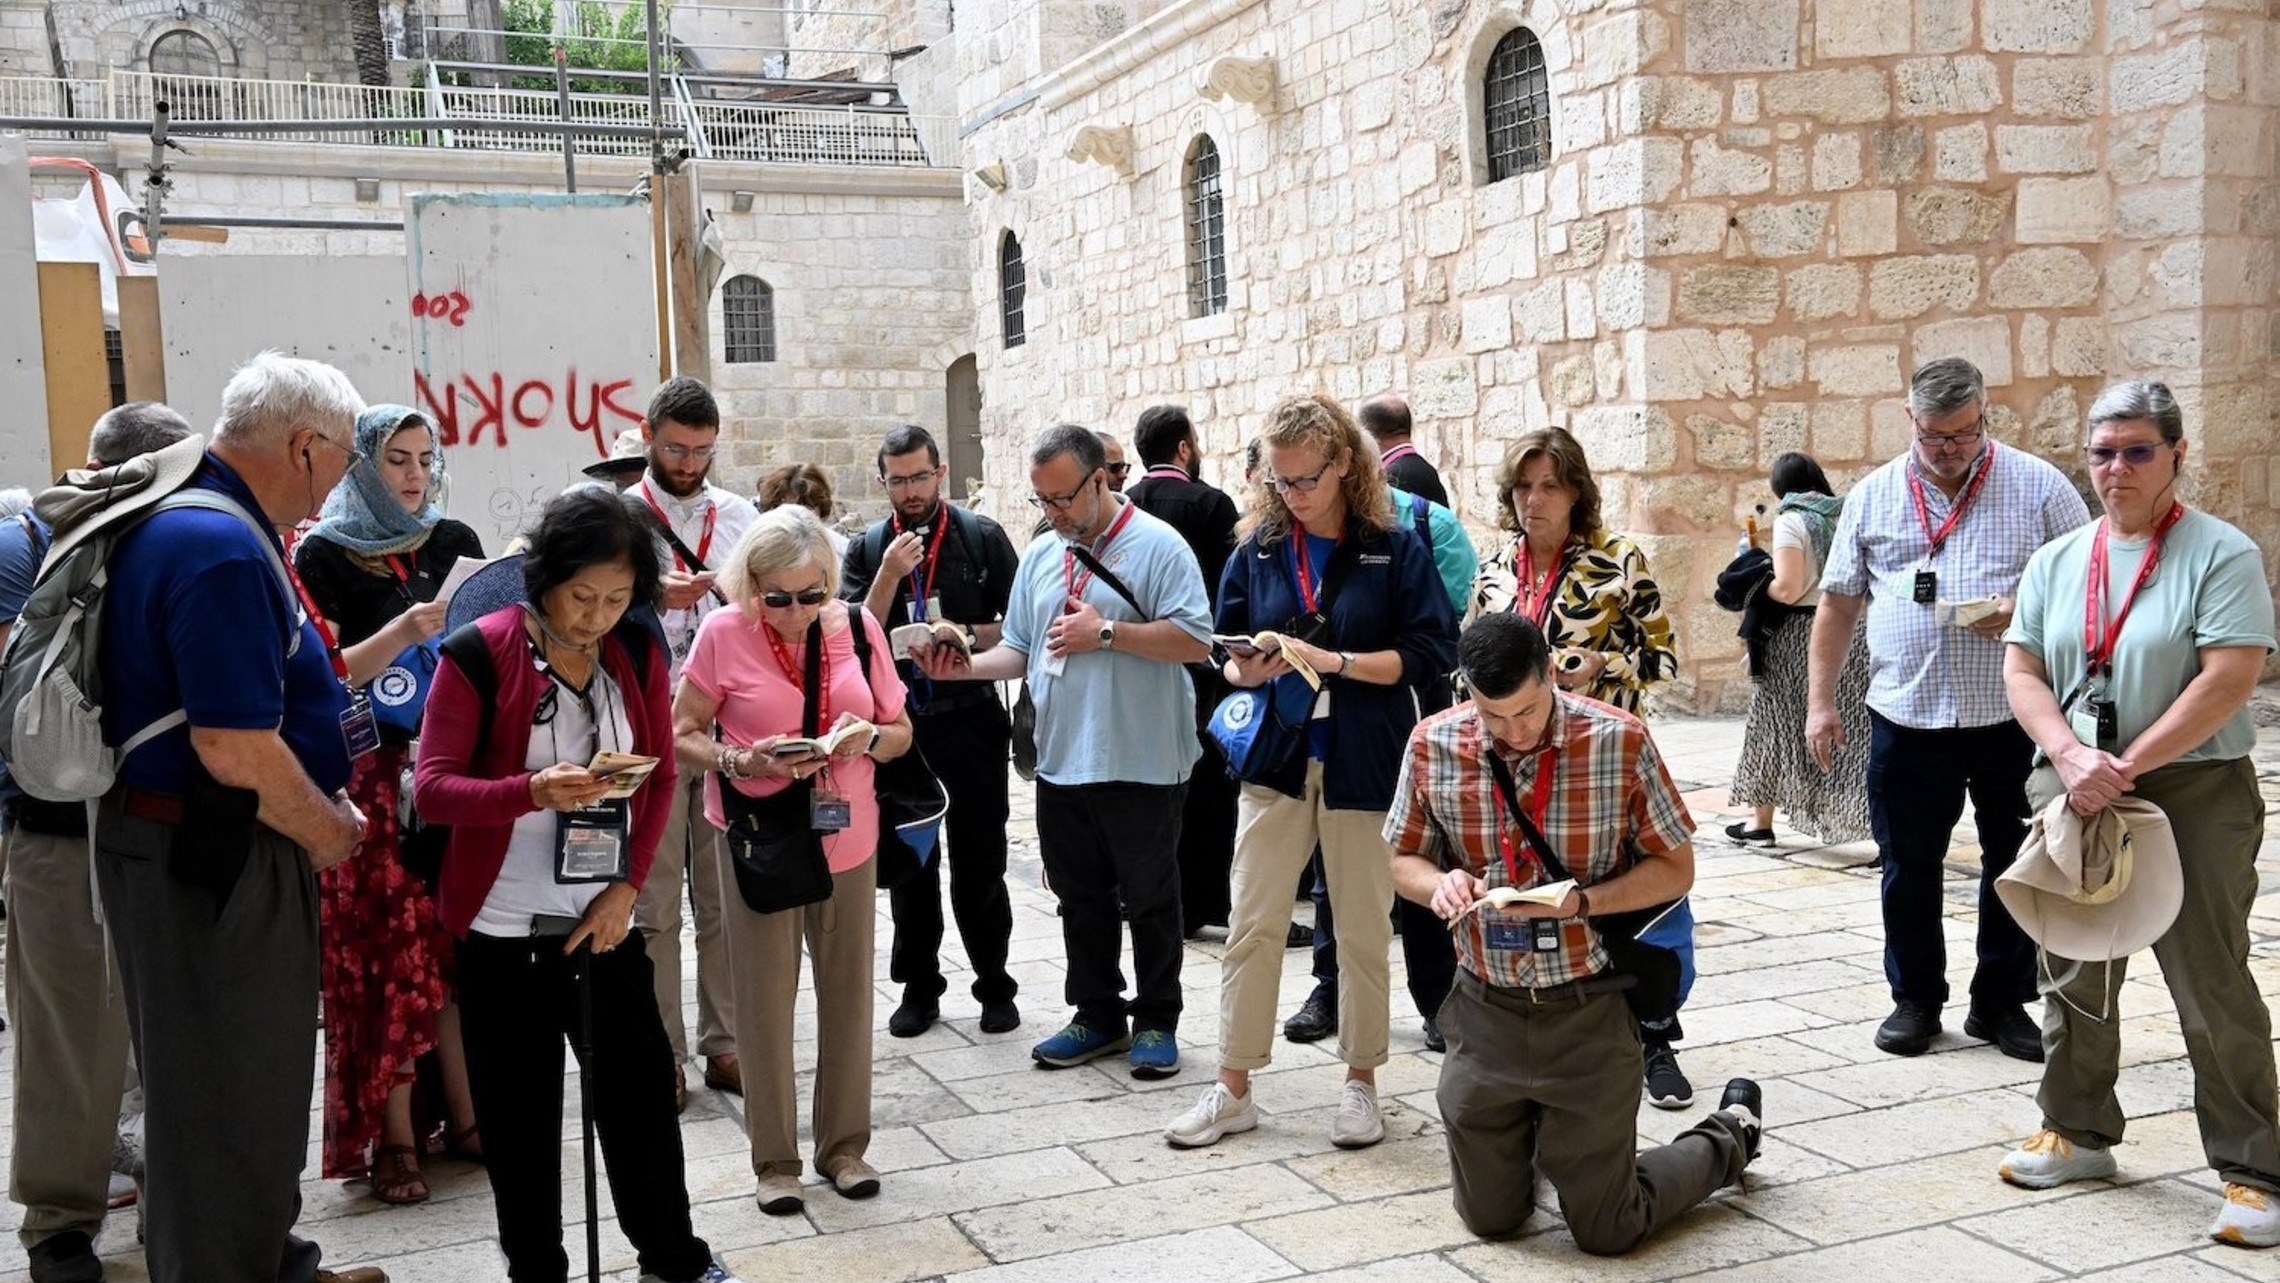 Pilgrims from the Diocese of Arlington, Va., pray in the courtyard of the Church of the Holy Sepulcher.